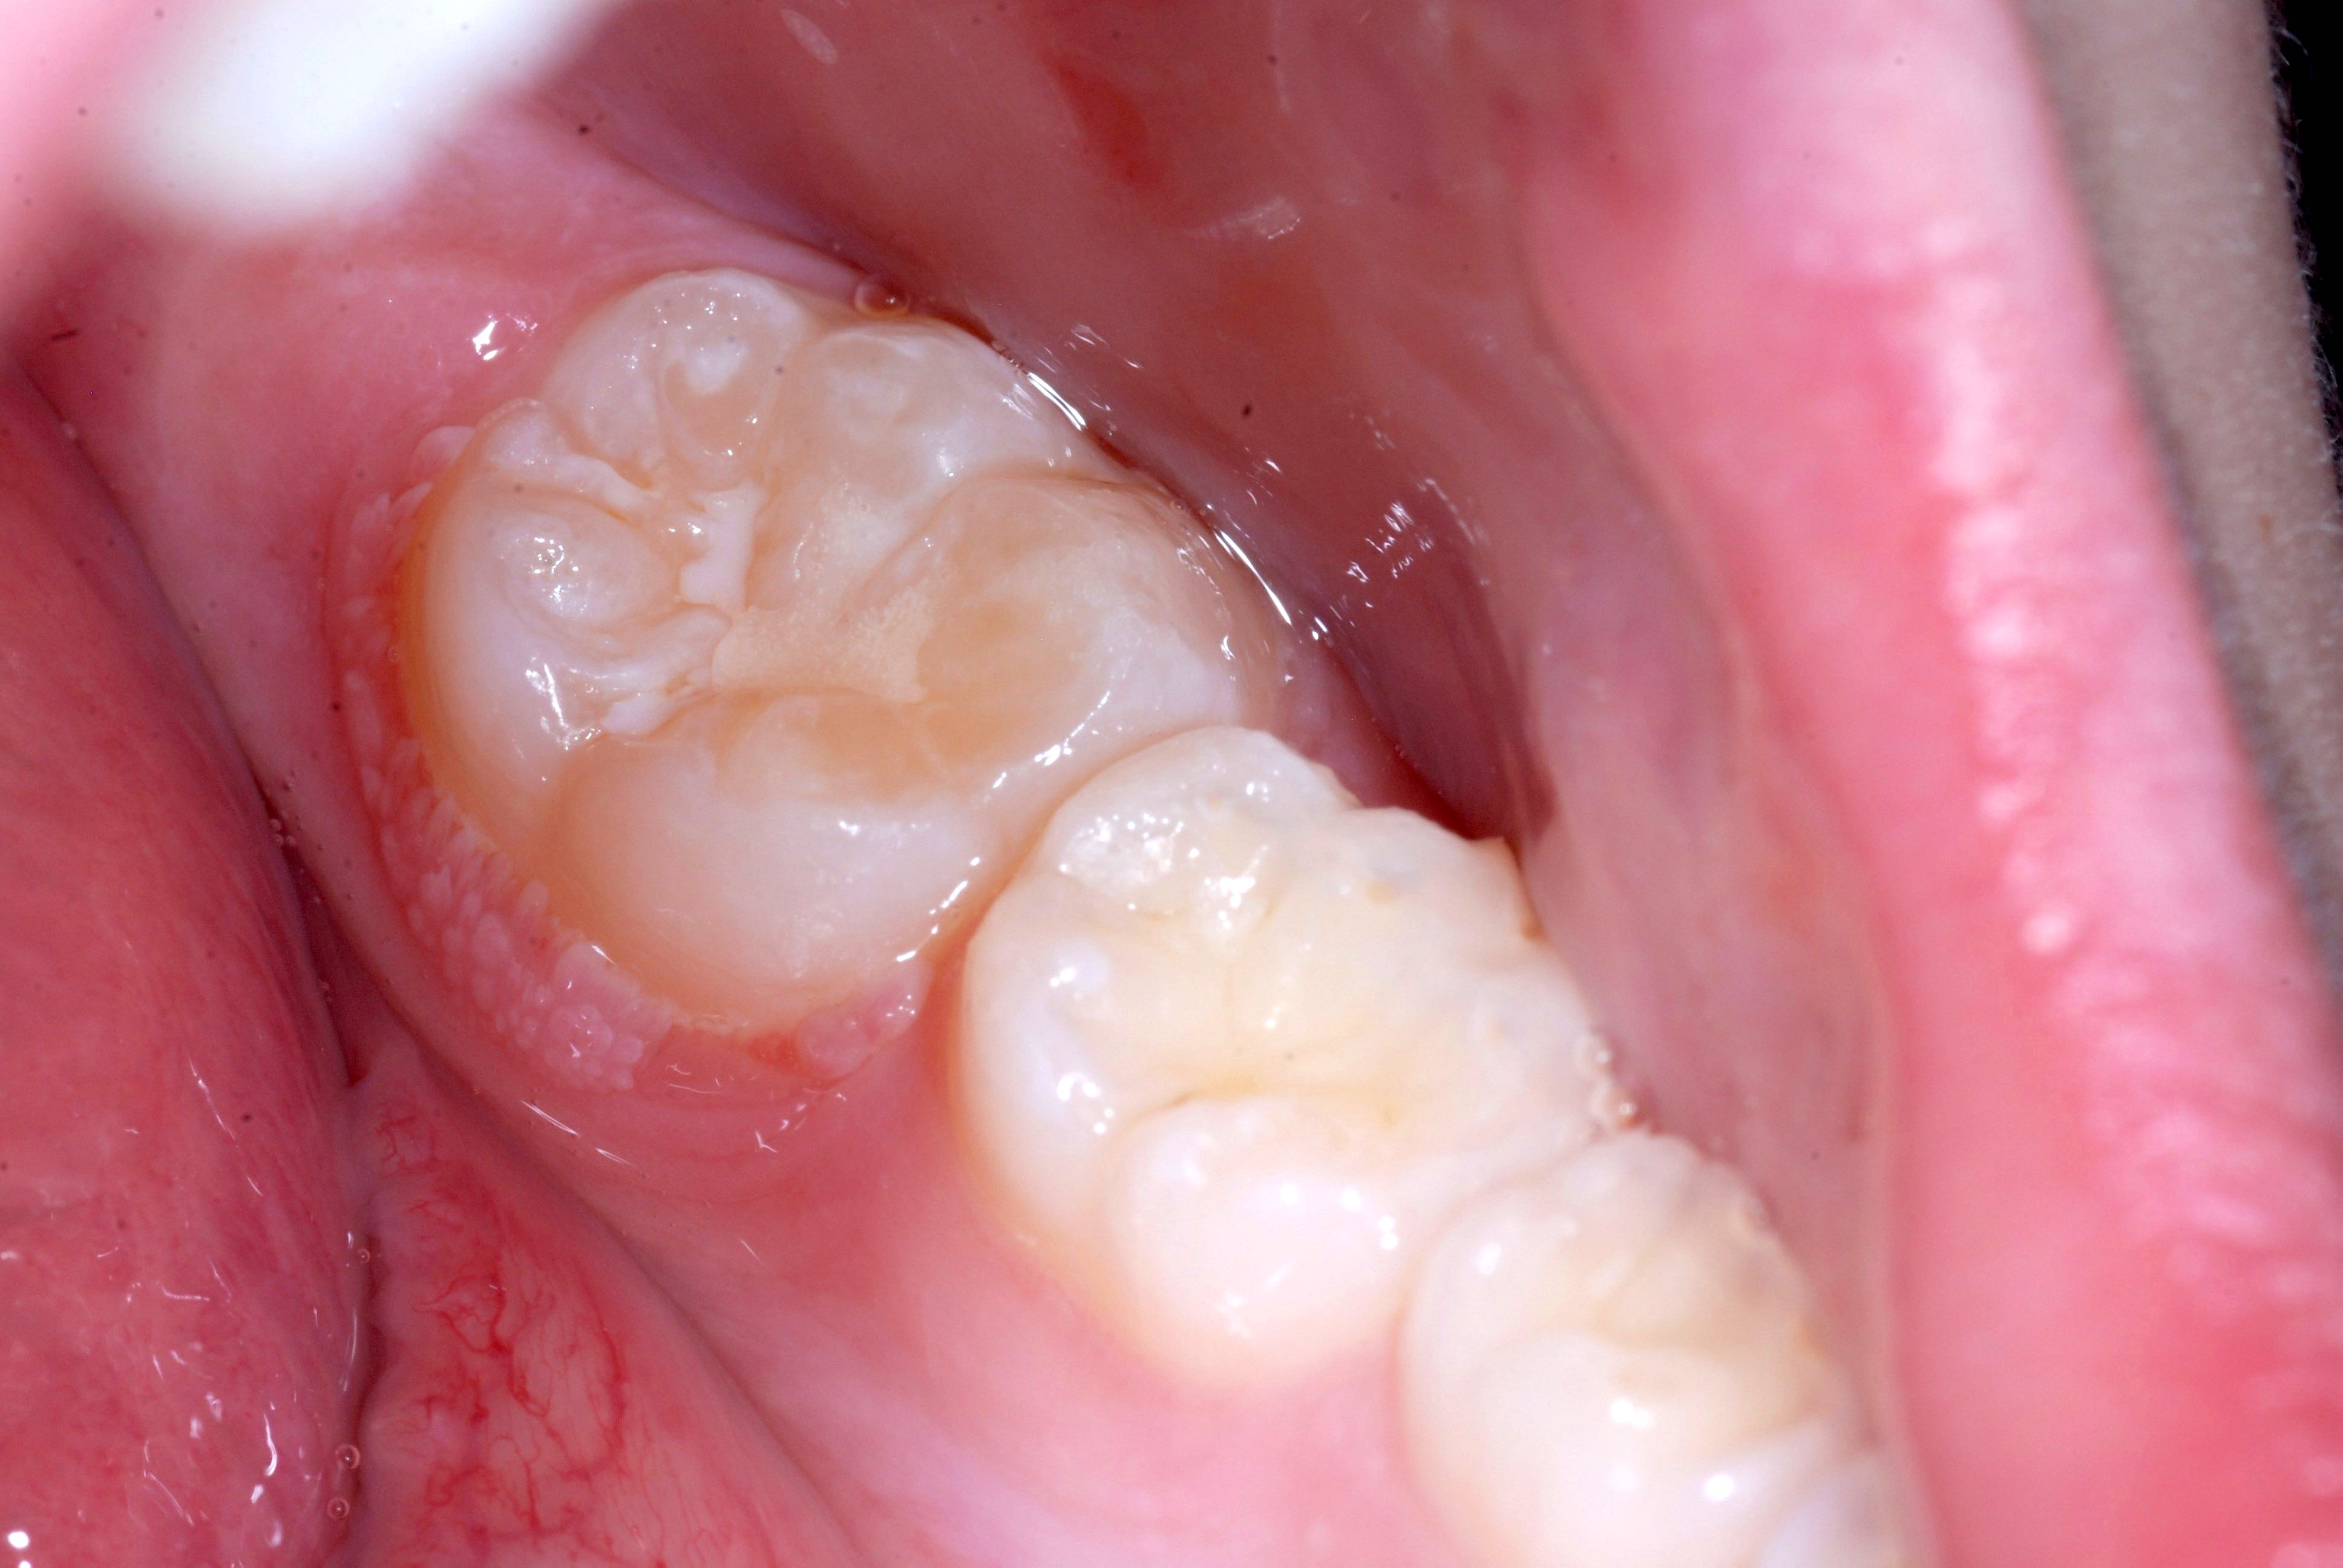 Squamous cell papilloma mouth - Squamous papilloma of mouth